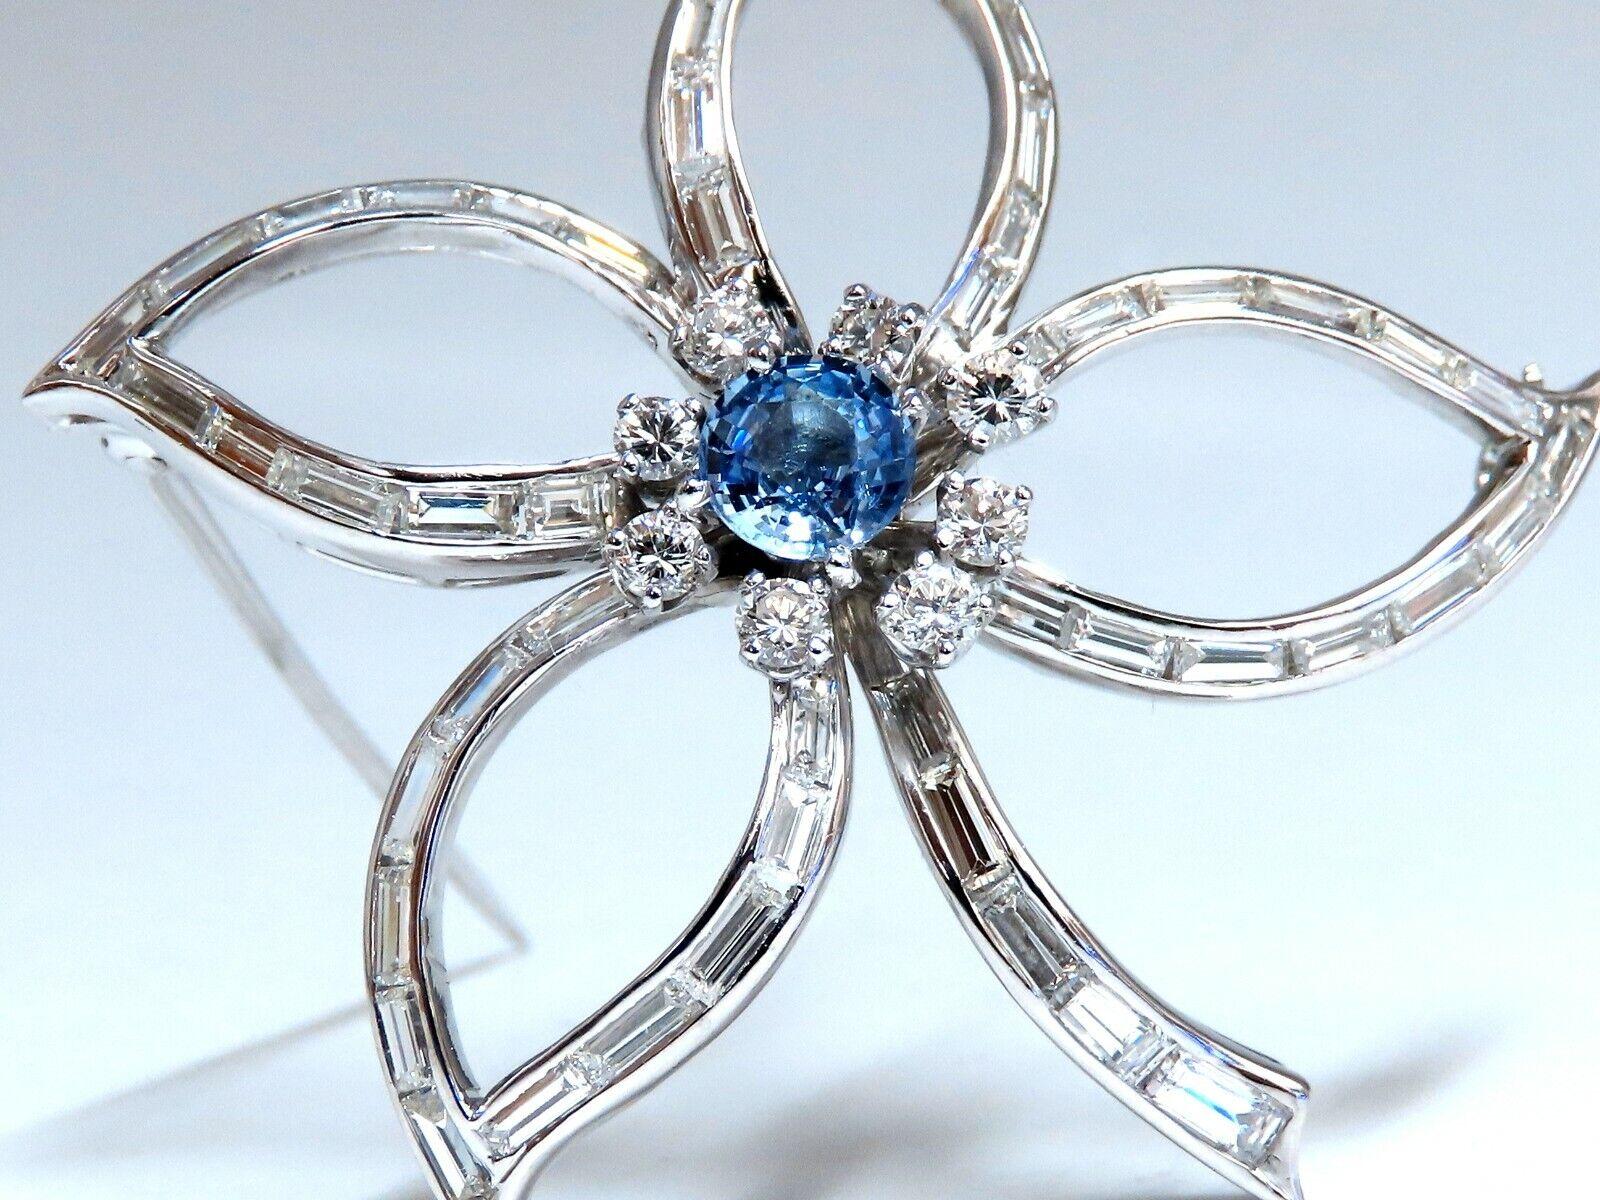  Sapphire Flower Brooch

 .91ct Natural Blue  Sapphire

Round Cut, Clean Clarity 5.6mm diameter

1.50ct Natural Diamonds.

Baguette, Full cut Brilliant.

H-color VS-2 clarity.

Platinum

intricate details

15 grams.

Overall: 1.75 x 1.77 inch

$8000